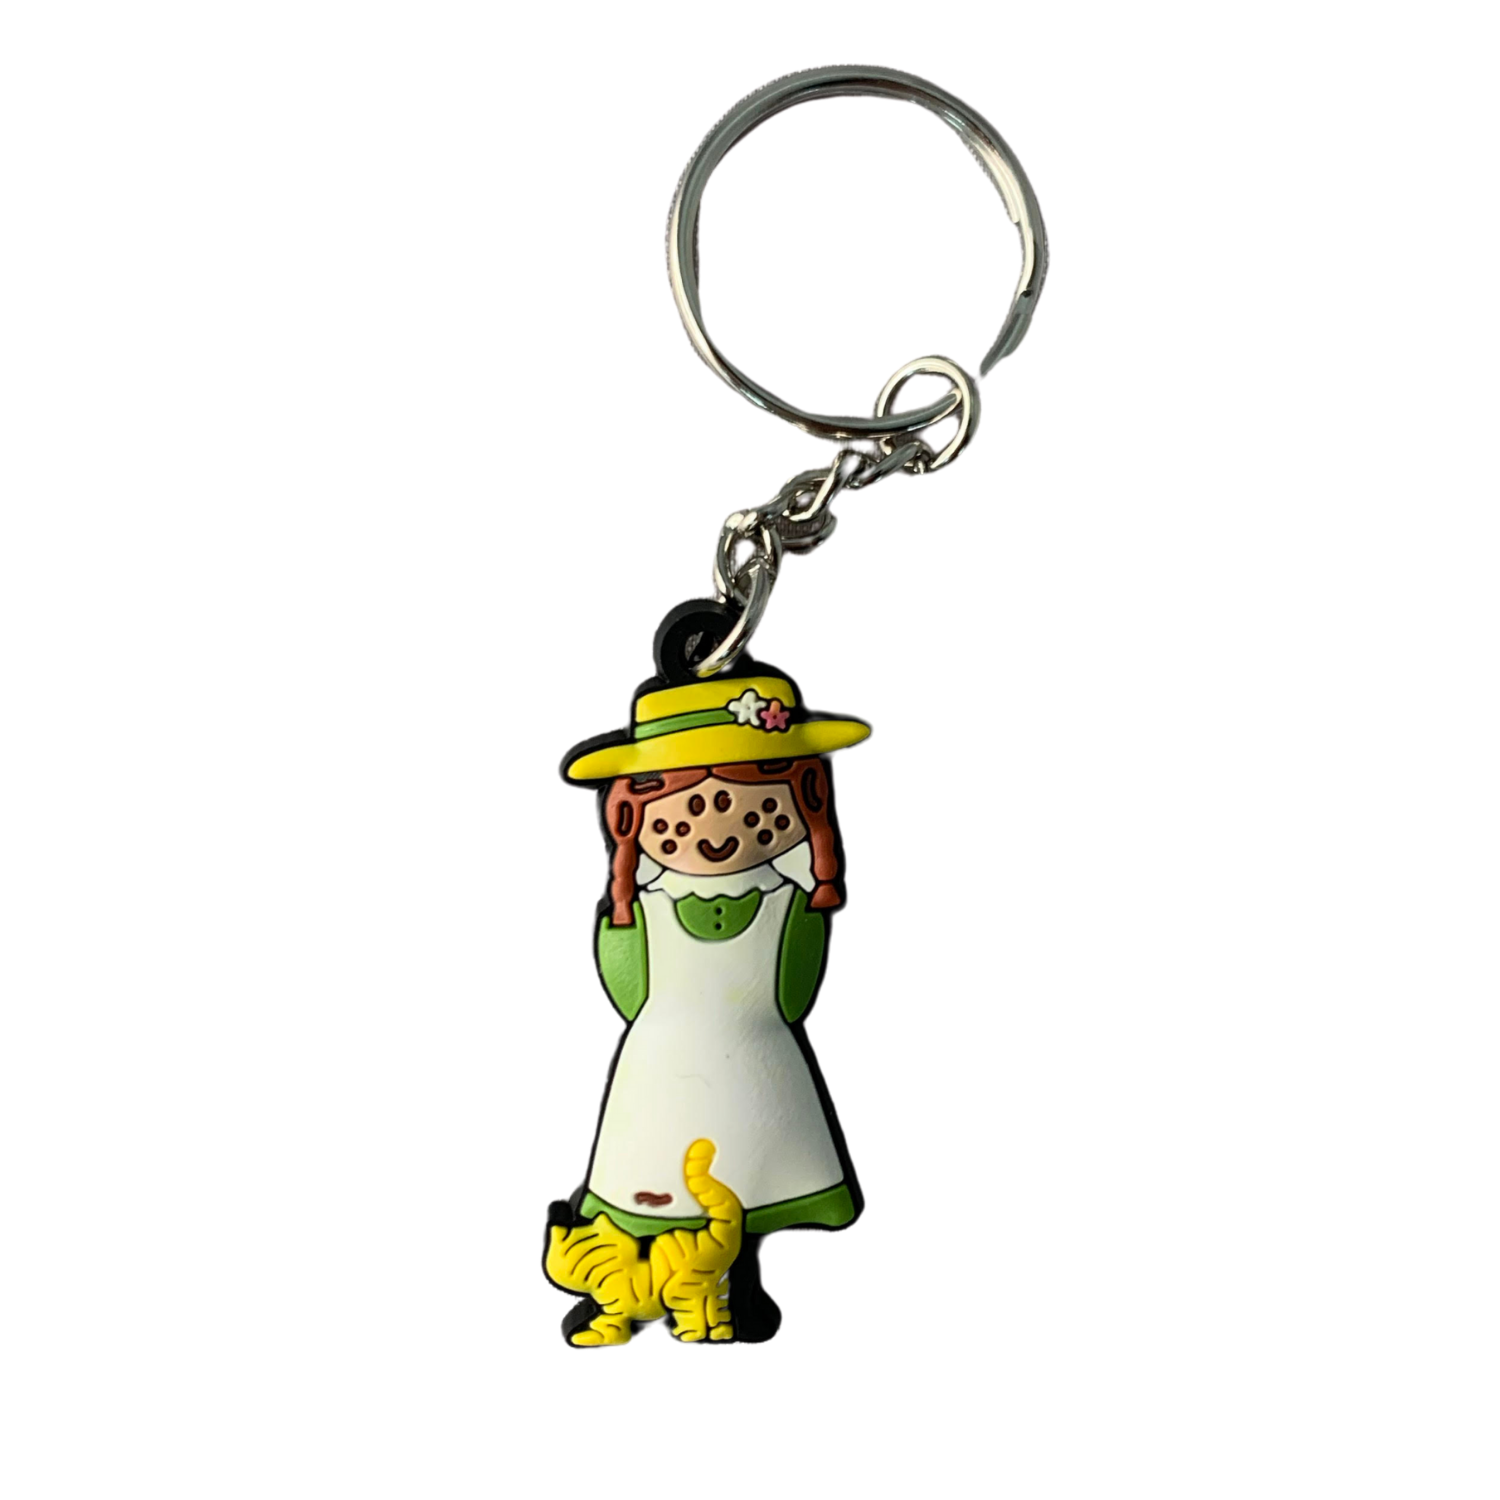 Lil' Anne PVC Keychain - This PVC Anne with Cat keychain is packaged and ready for gift-giving.